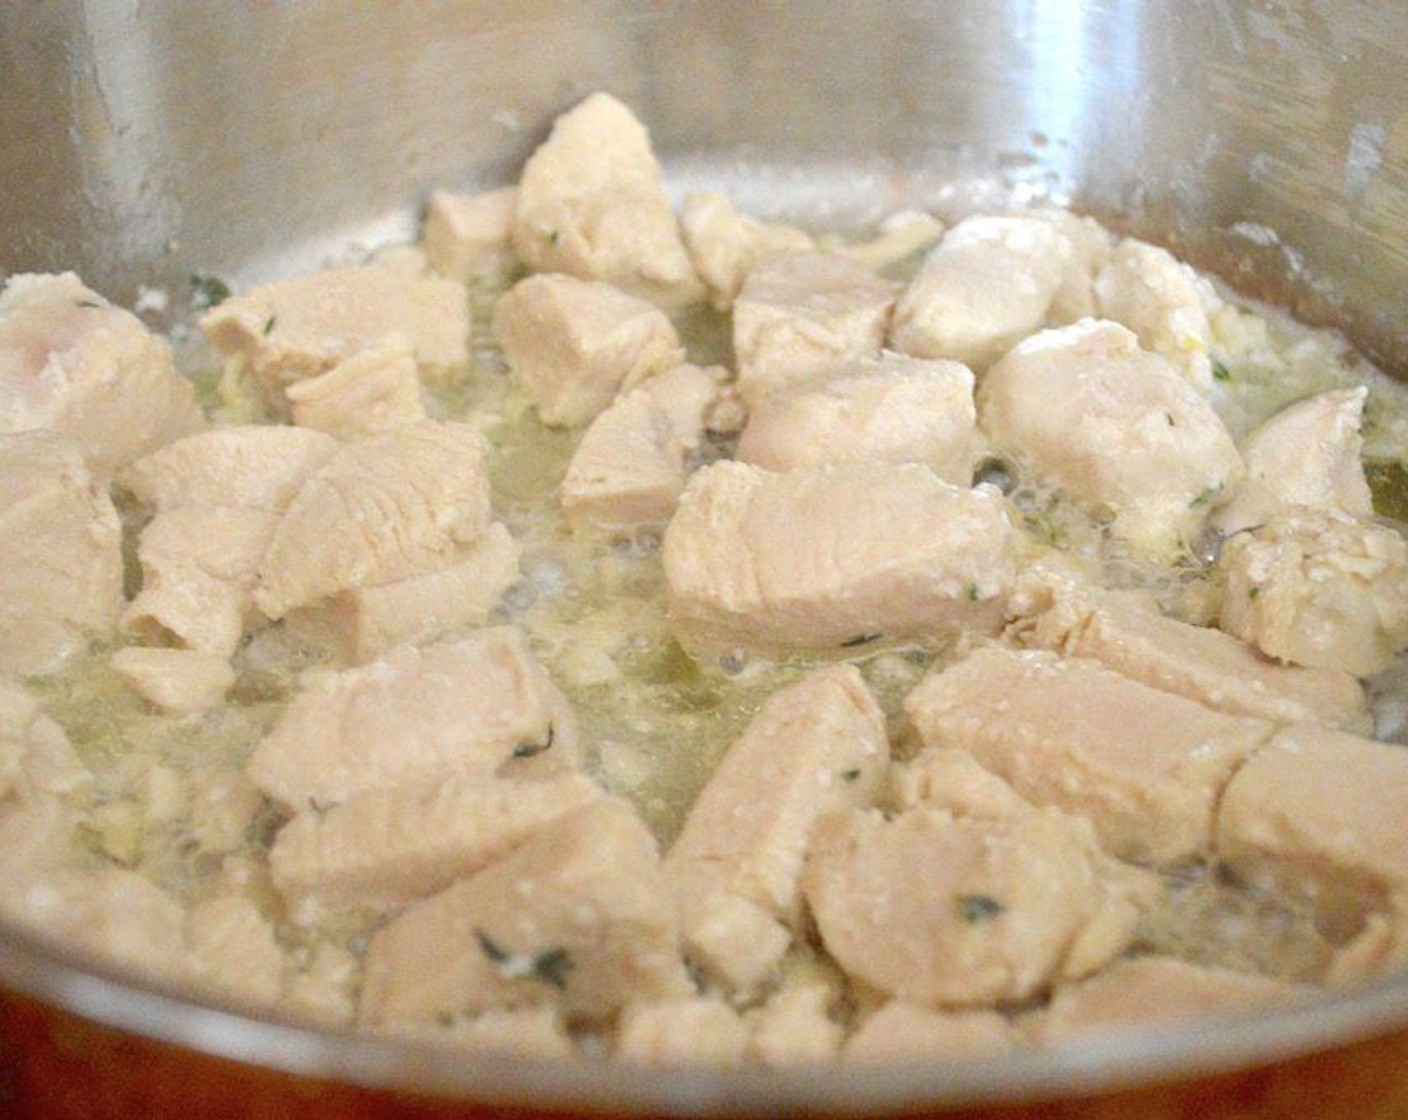 step 3 Add the Boneless, Skinless Chicken Breast (1 lb) and cook it through completely. While it cooks add the Garlic (2 cloves), Fresh Thyme (1 tsp), and Lemon (1/2) to make everything fragrant. Season it with Salt (1 pinch) and Freshly Ground Black Pepper (1 pinch). Remove to a plate and set aside.